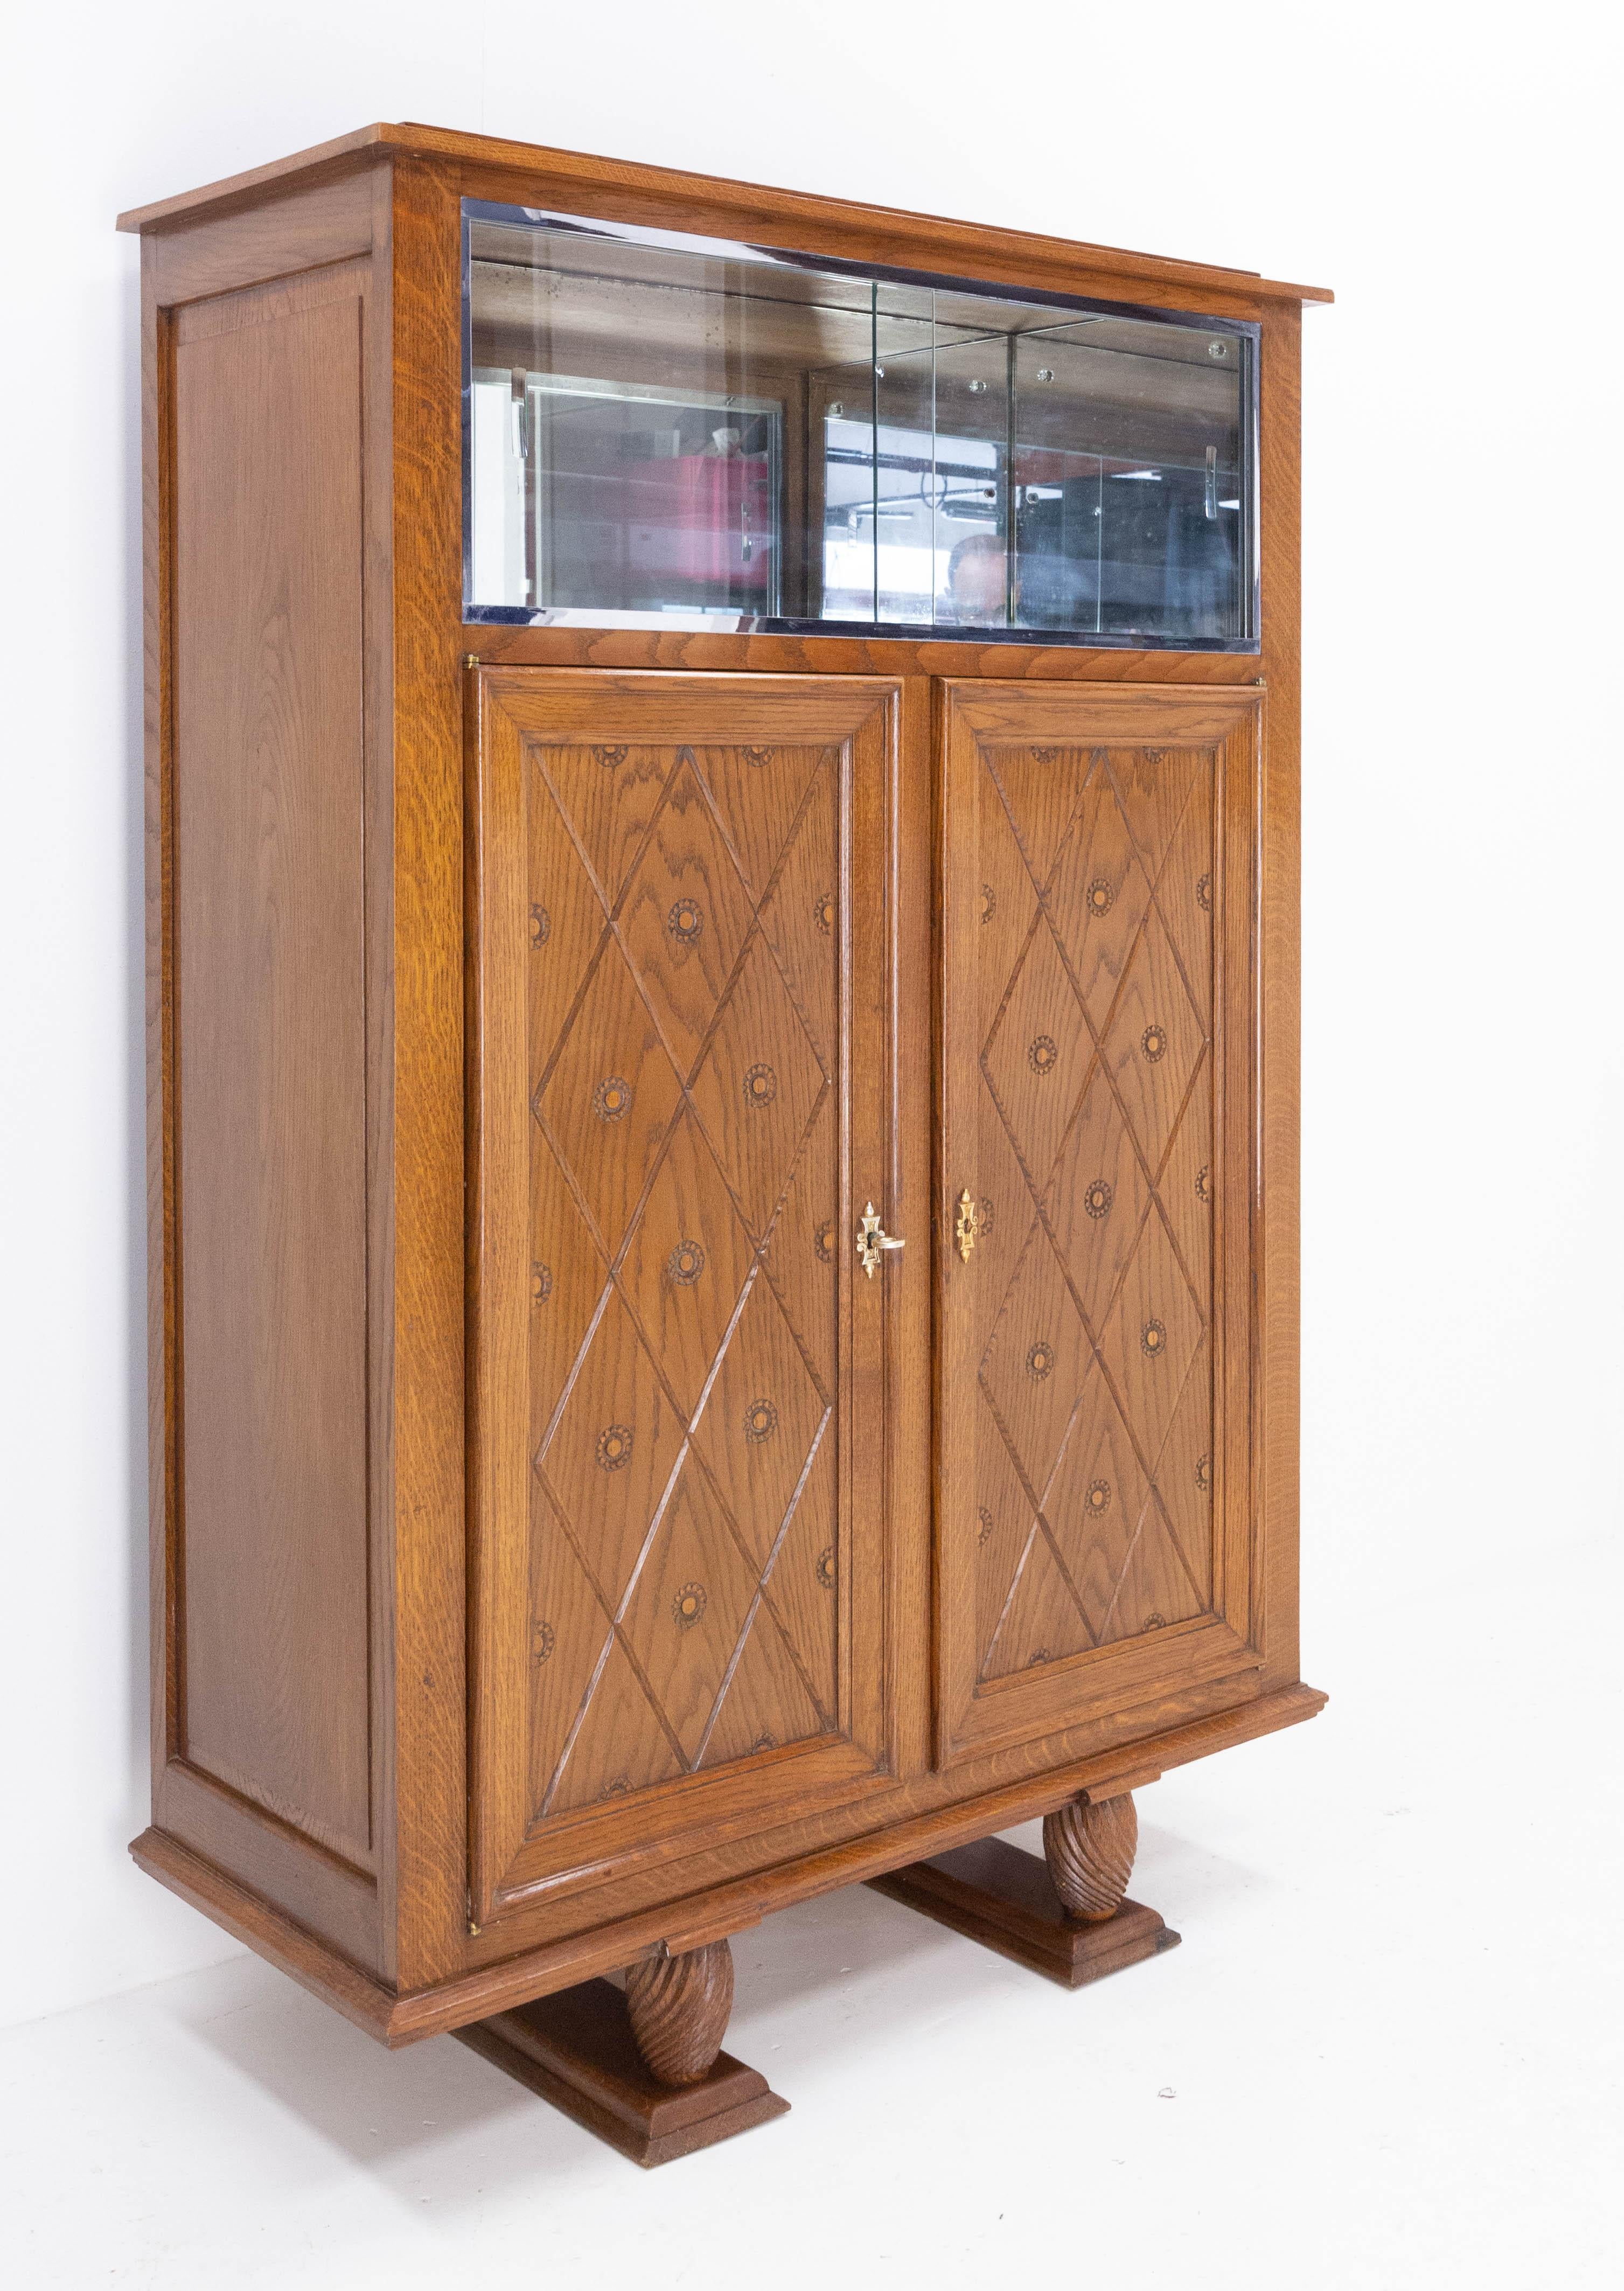 Vitrine oak buffet, French, circa 1950
Display cabinet with sliding glass doors
Solid Oad with carved diamonds patterns
Good condition with superb patina

Shipping:
L 106/ P 44/ H 158 cm 87 kg.

